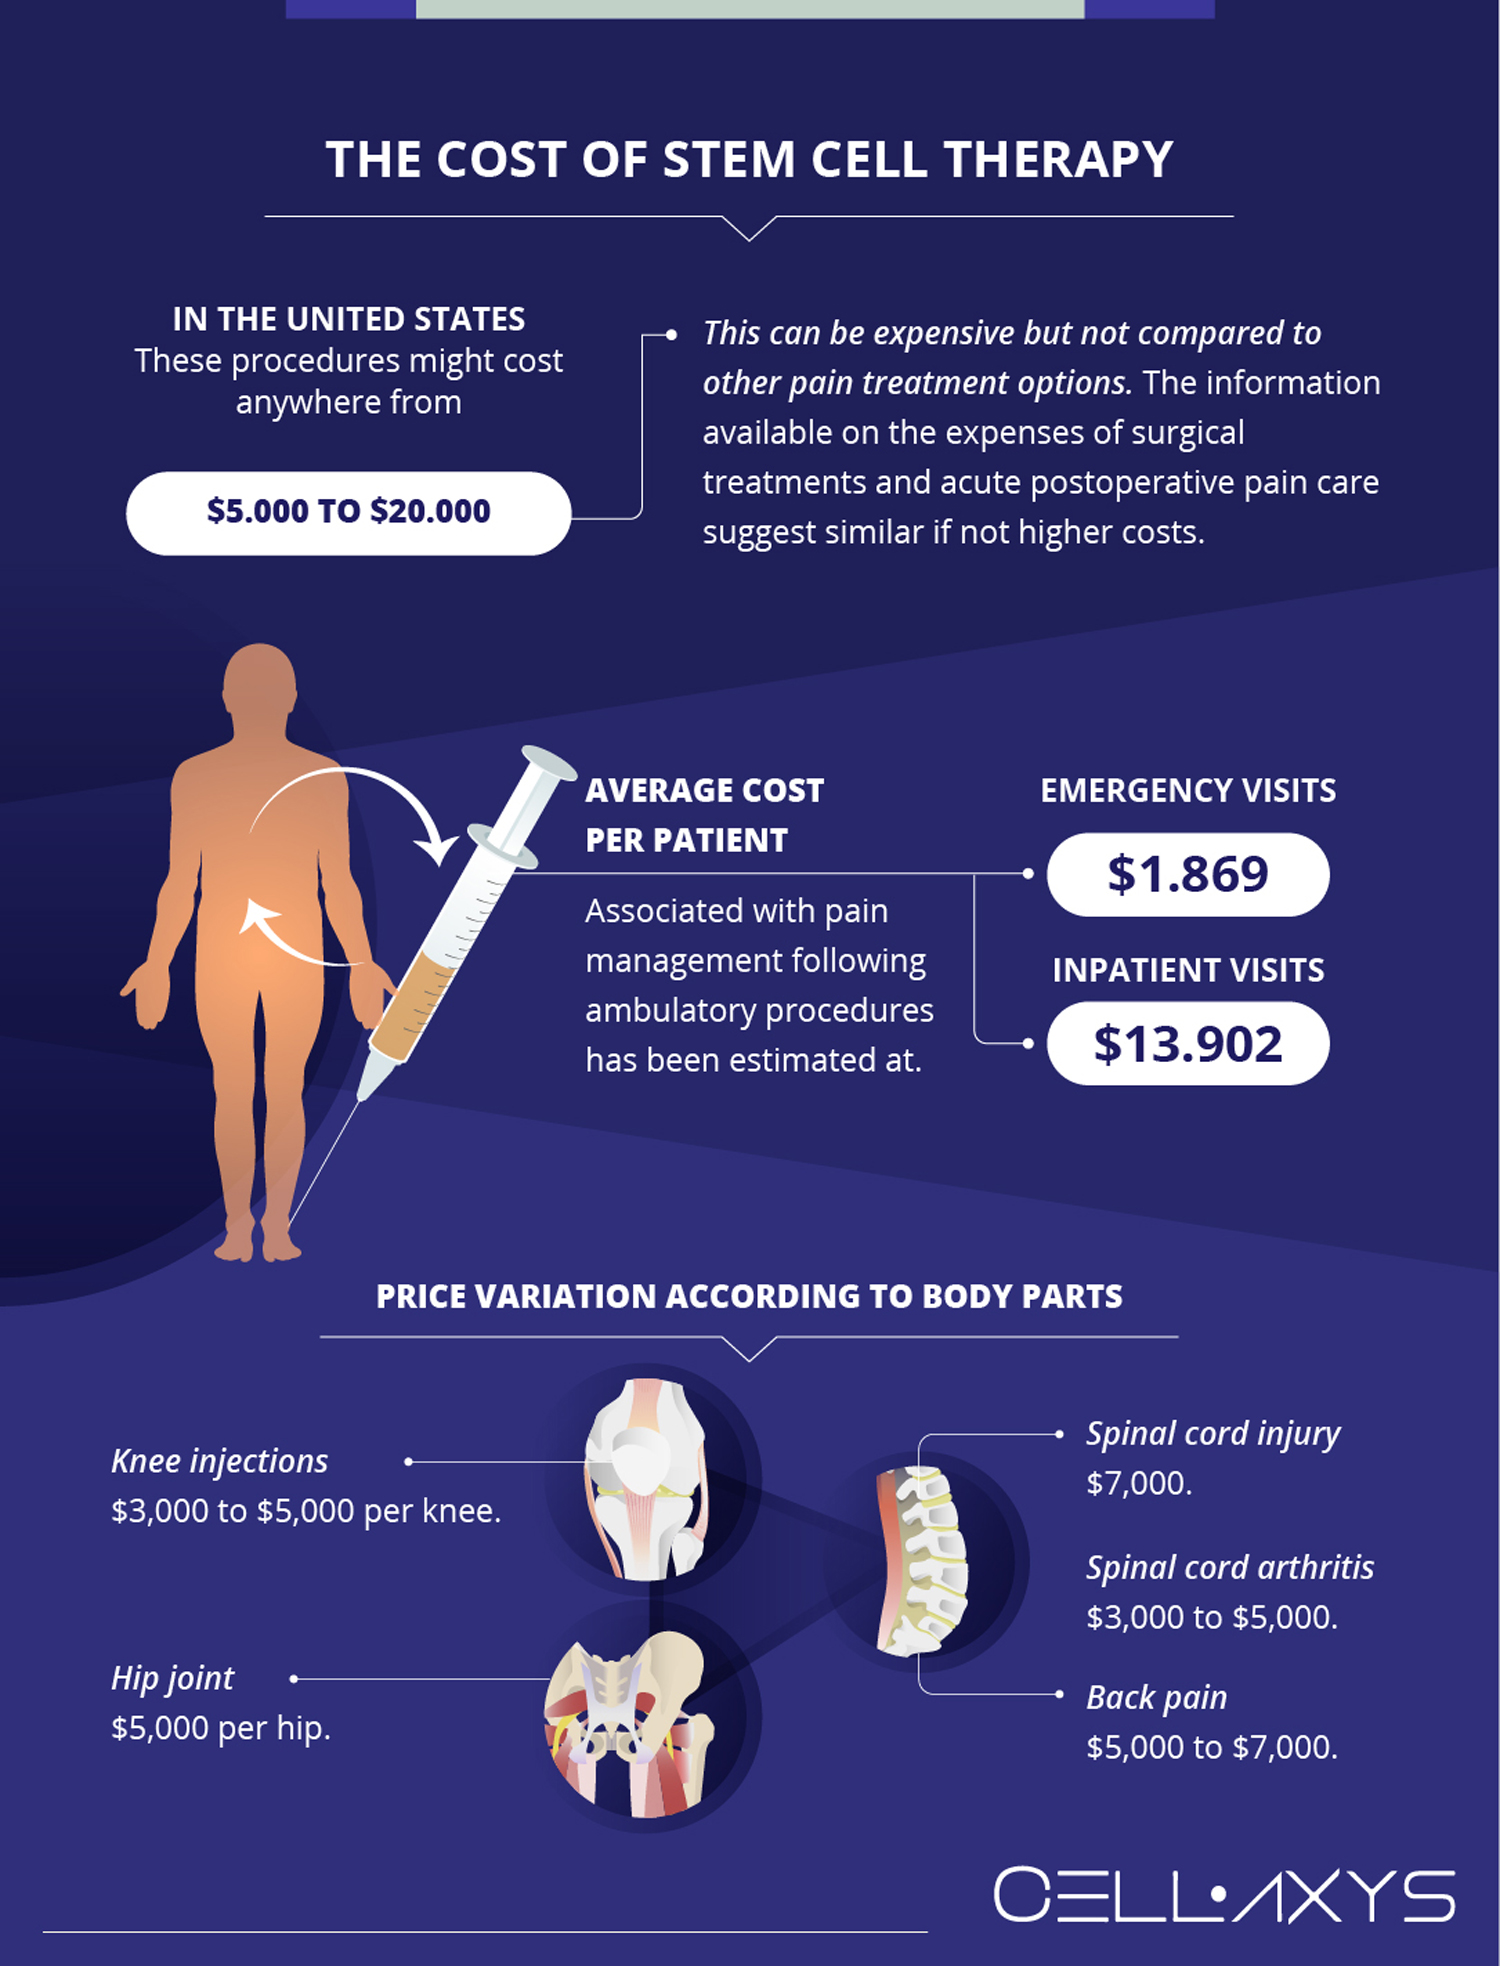 The Cost of Stem Cell Therapy